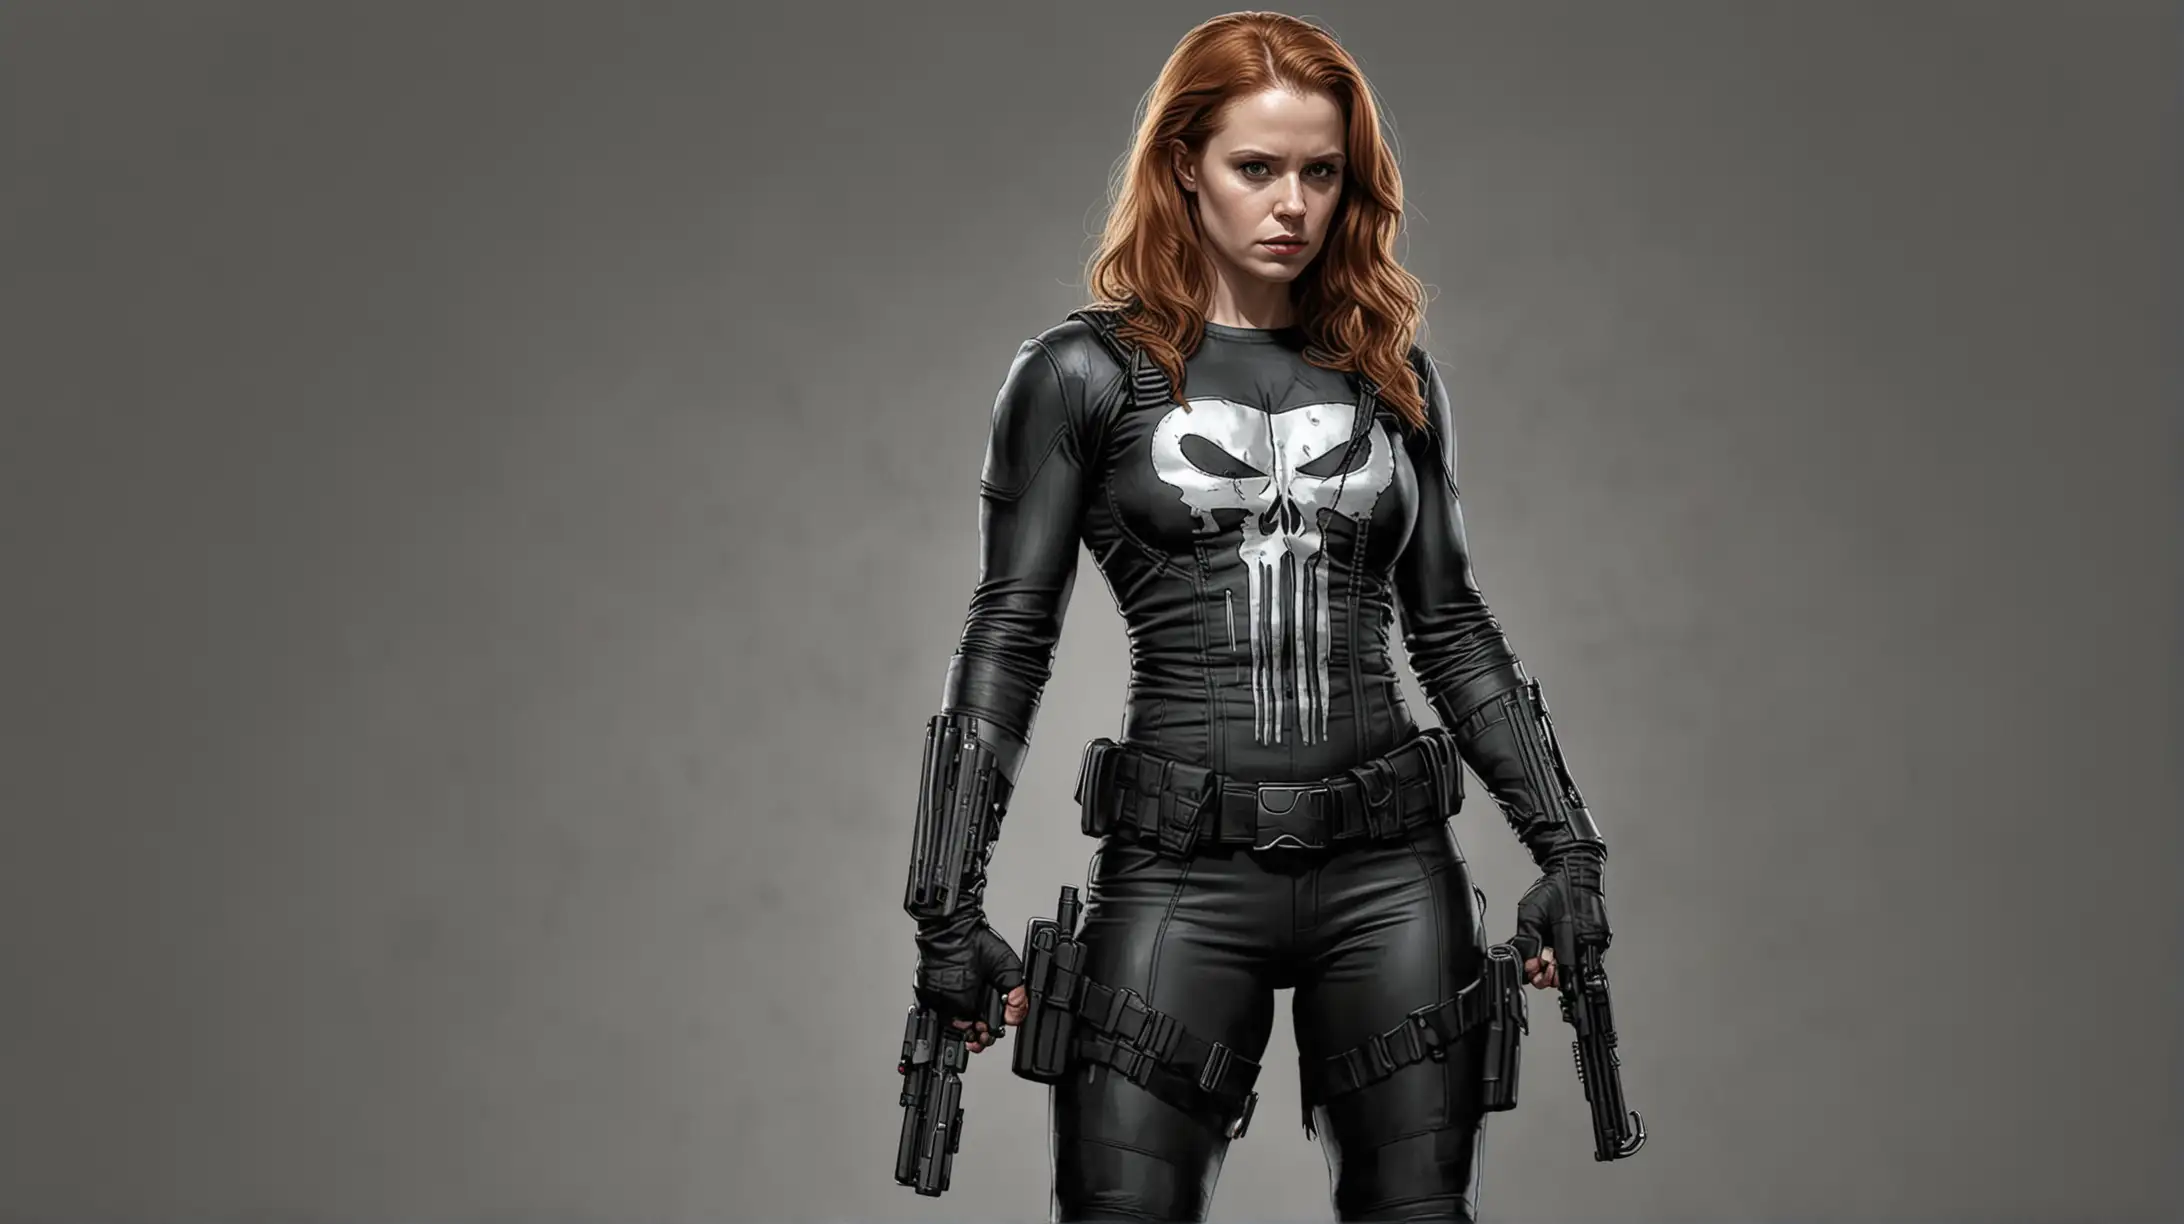 drawing, Amy Adams as Punisher (Marvel character) alone, full length
